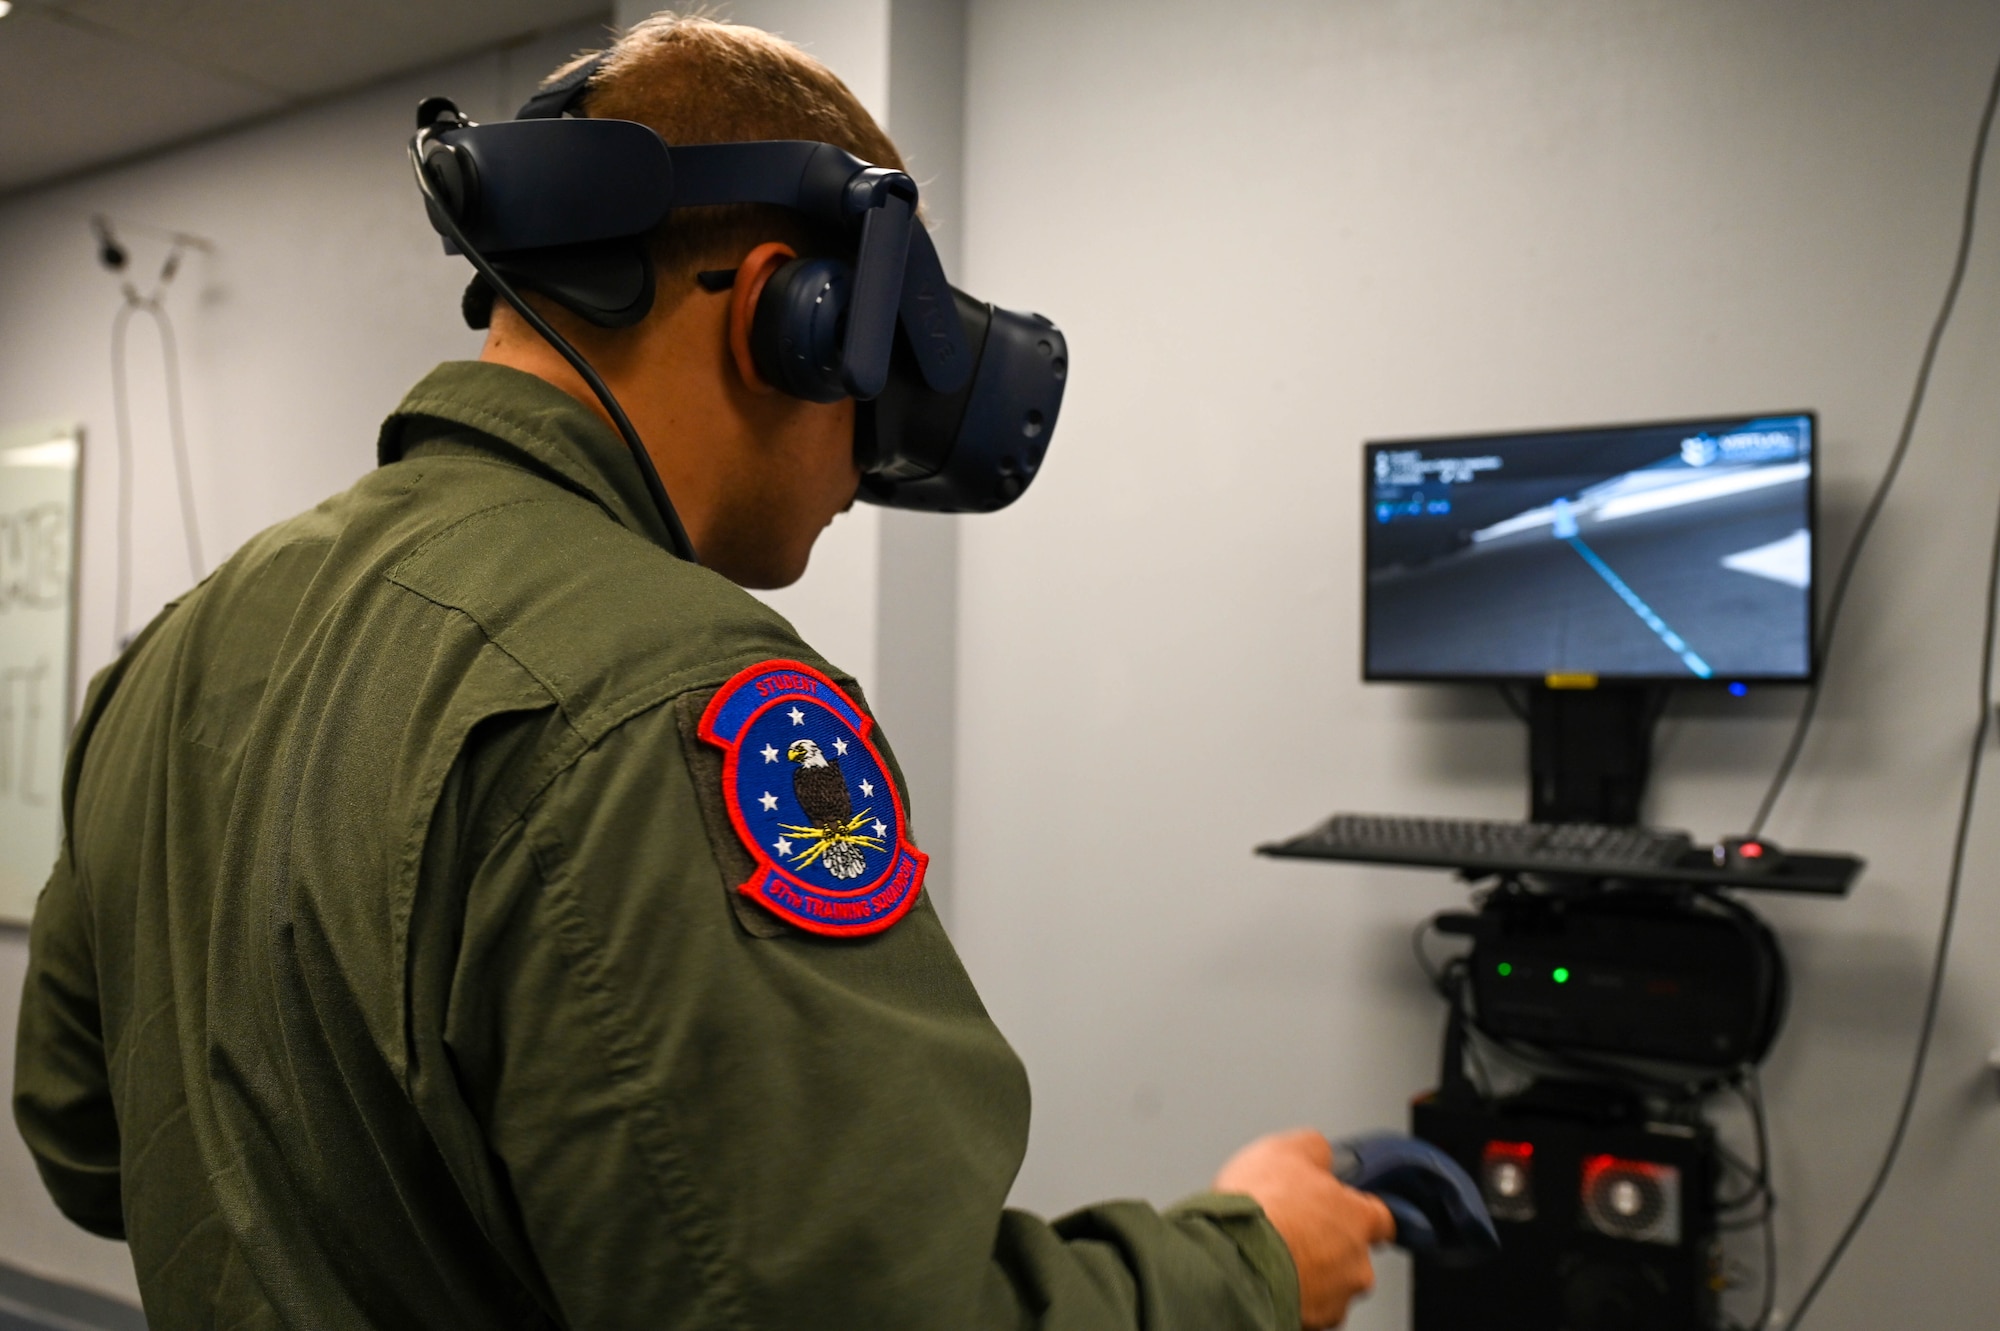 U.S. Air Force Airman Joseph Darisse, 97th Training Squadron loadmaster student, performs an external check on a C-17 Globemaster III using a virtual reality headset in the virtual reality cafe at Altus Air Force Base, Oklahoma, Sept. 27, 2023. With 2110 graduates during fiscal year 2023, the squadron celebrates its highest number of student graduates in 16 years. (U.S. Air Force photo by Airman 1st Class Kari Degraffenreed